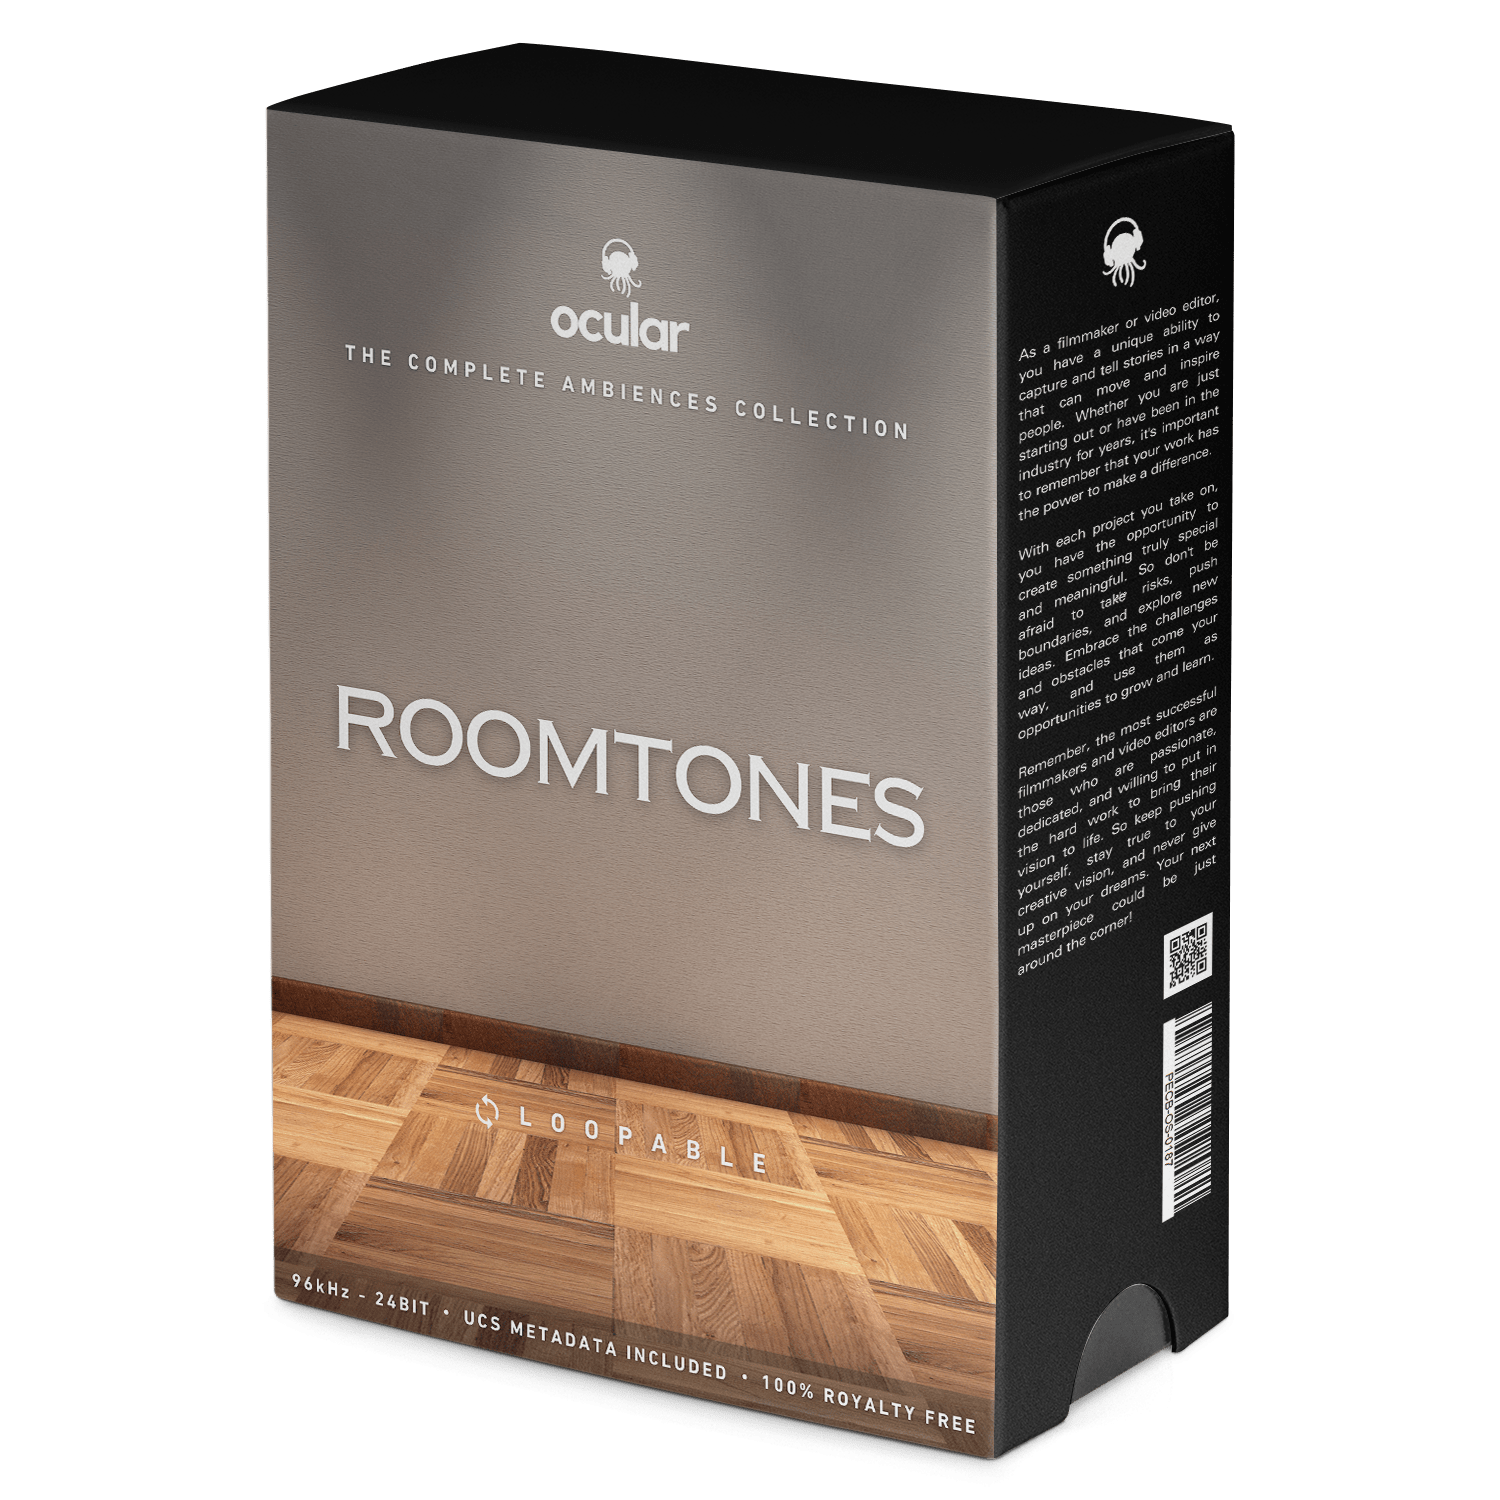 Roomtones Ambiences Sound Effects for Video Editing. Live Recorded Ambient Soundscapes.